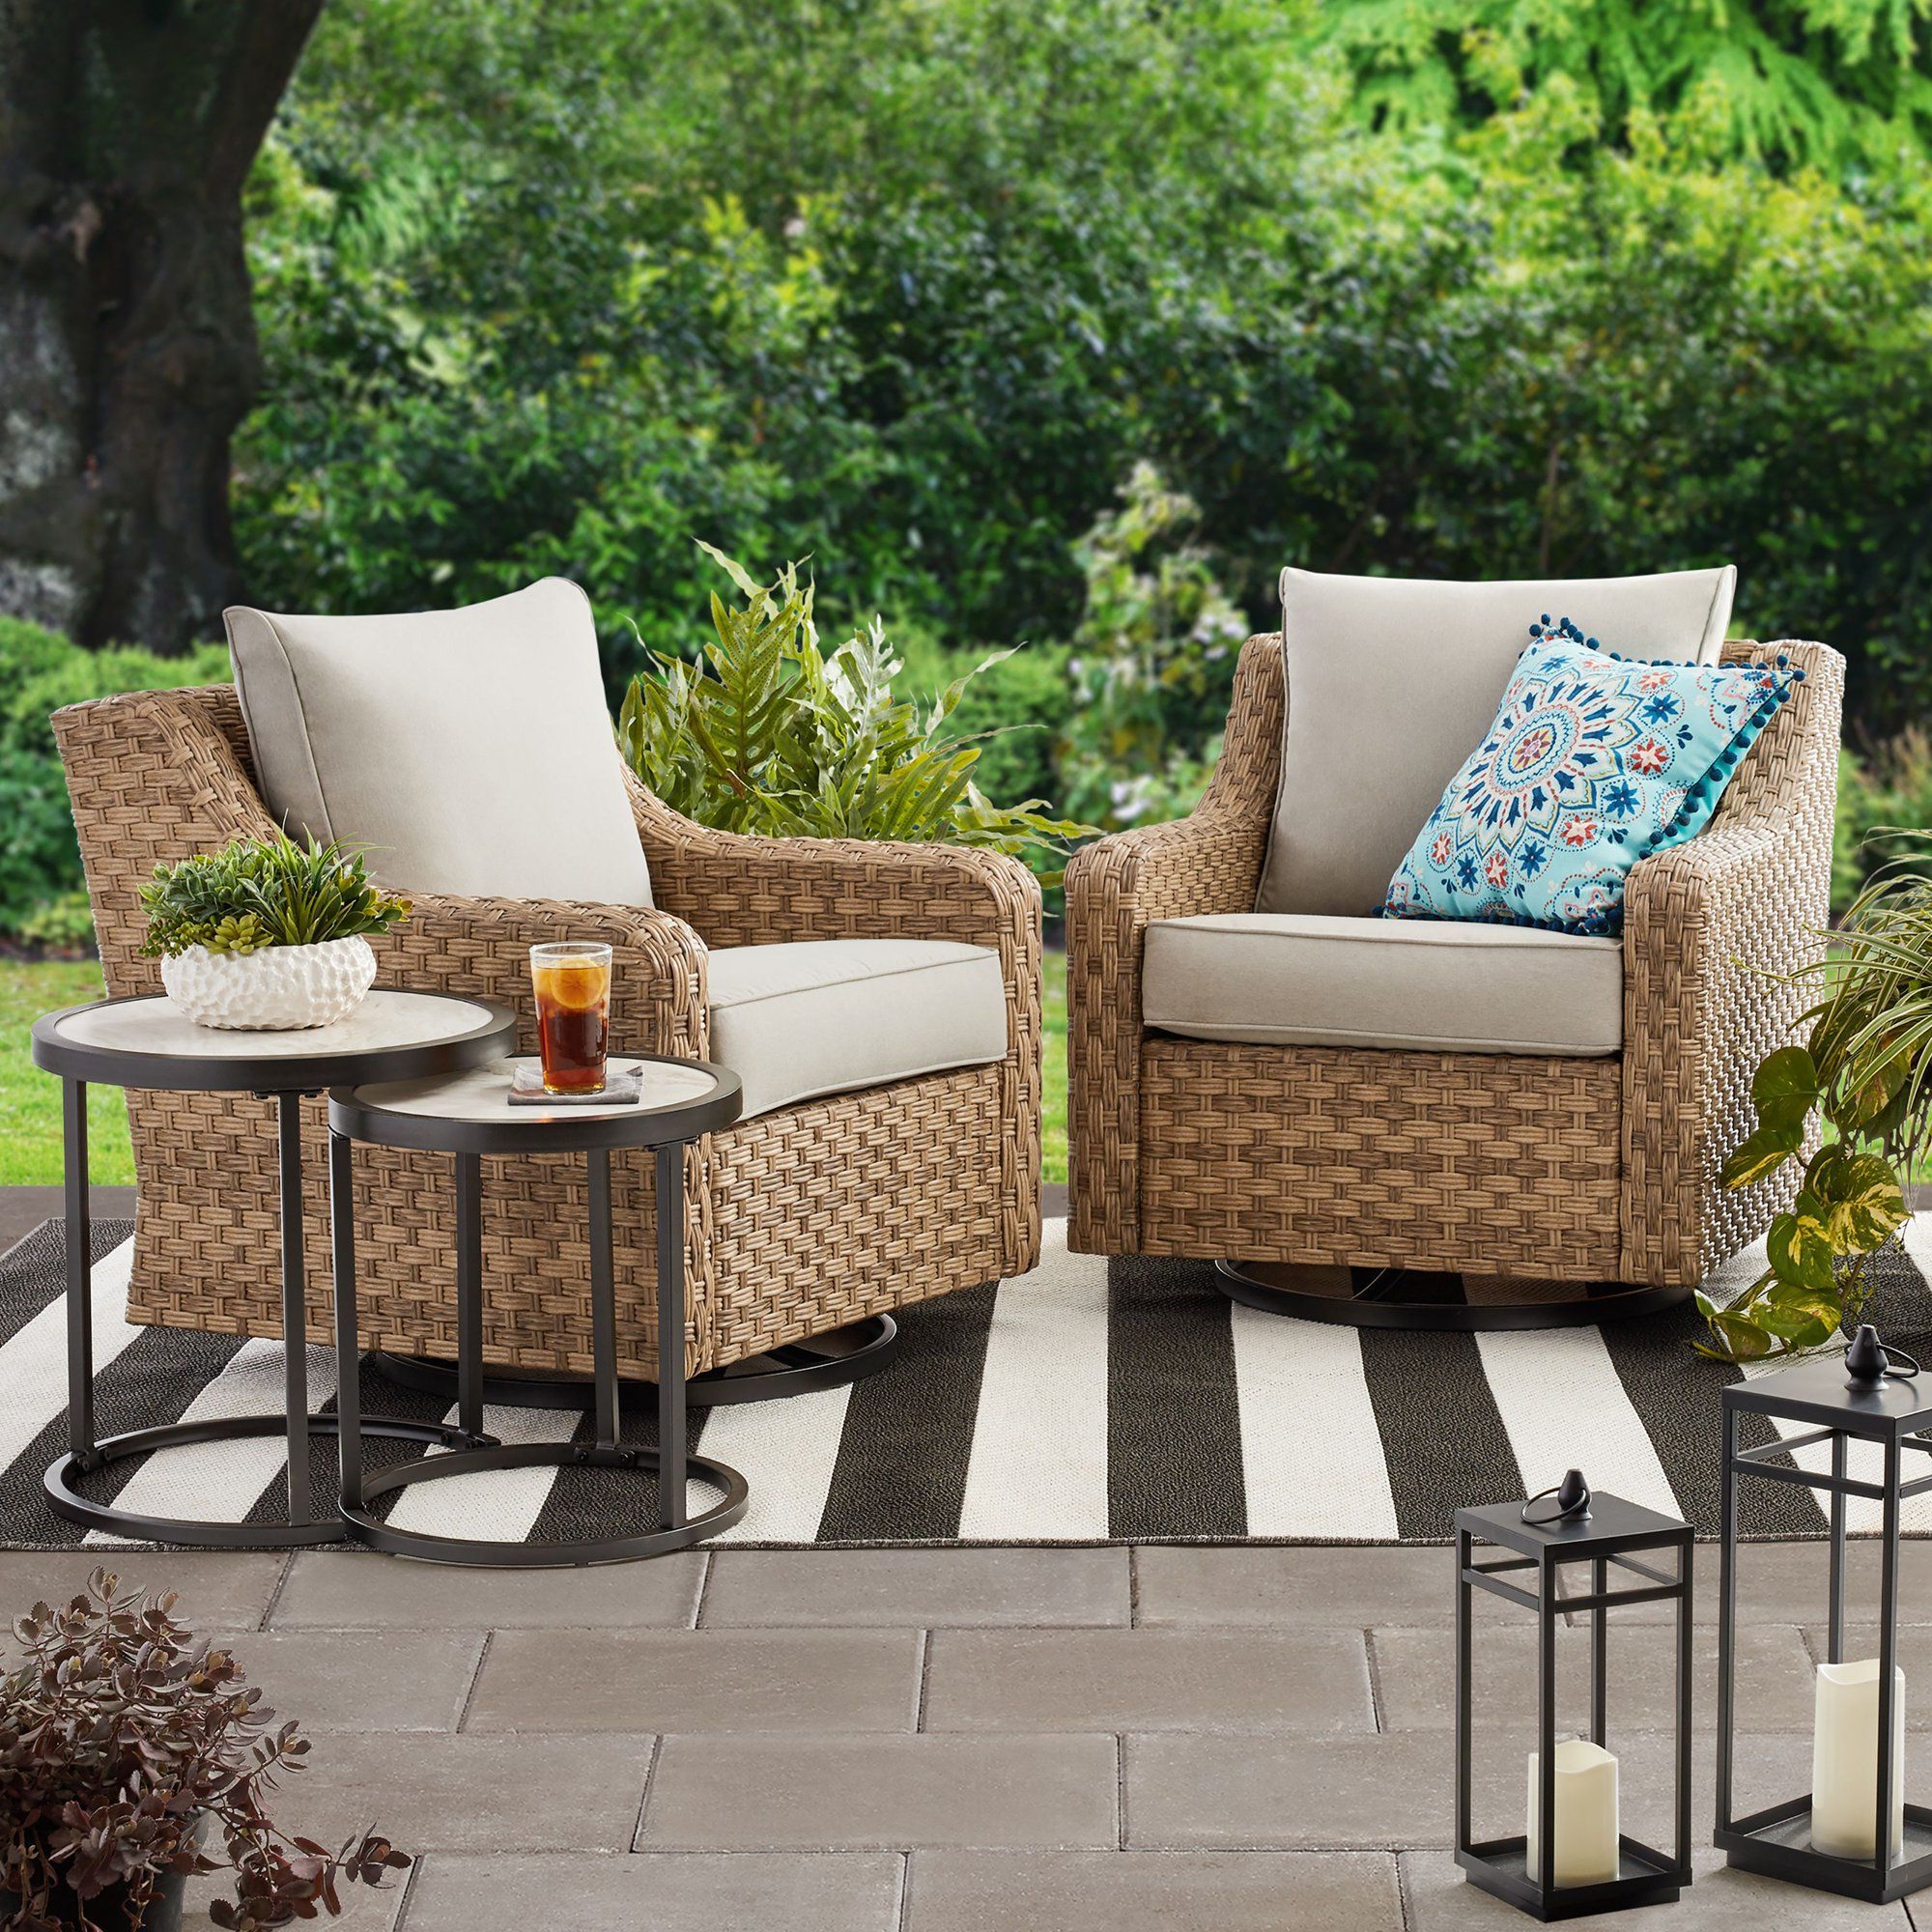 Patio Furniture Sets, Garden Patio Furniture, Conversation Set  Patio In Oaks Table Set With Patio Cover (View 6 of 15)